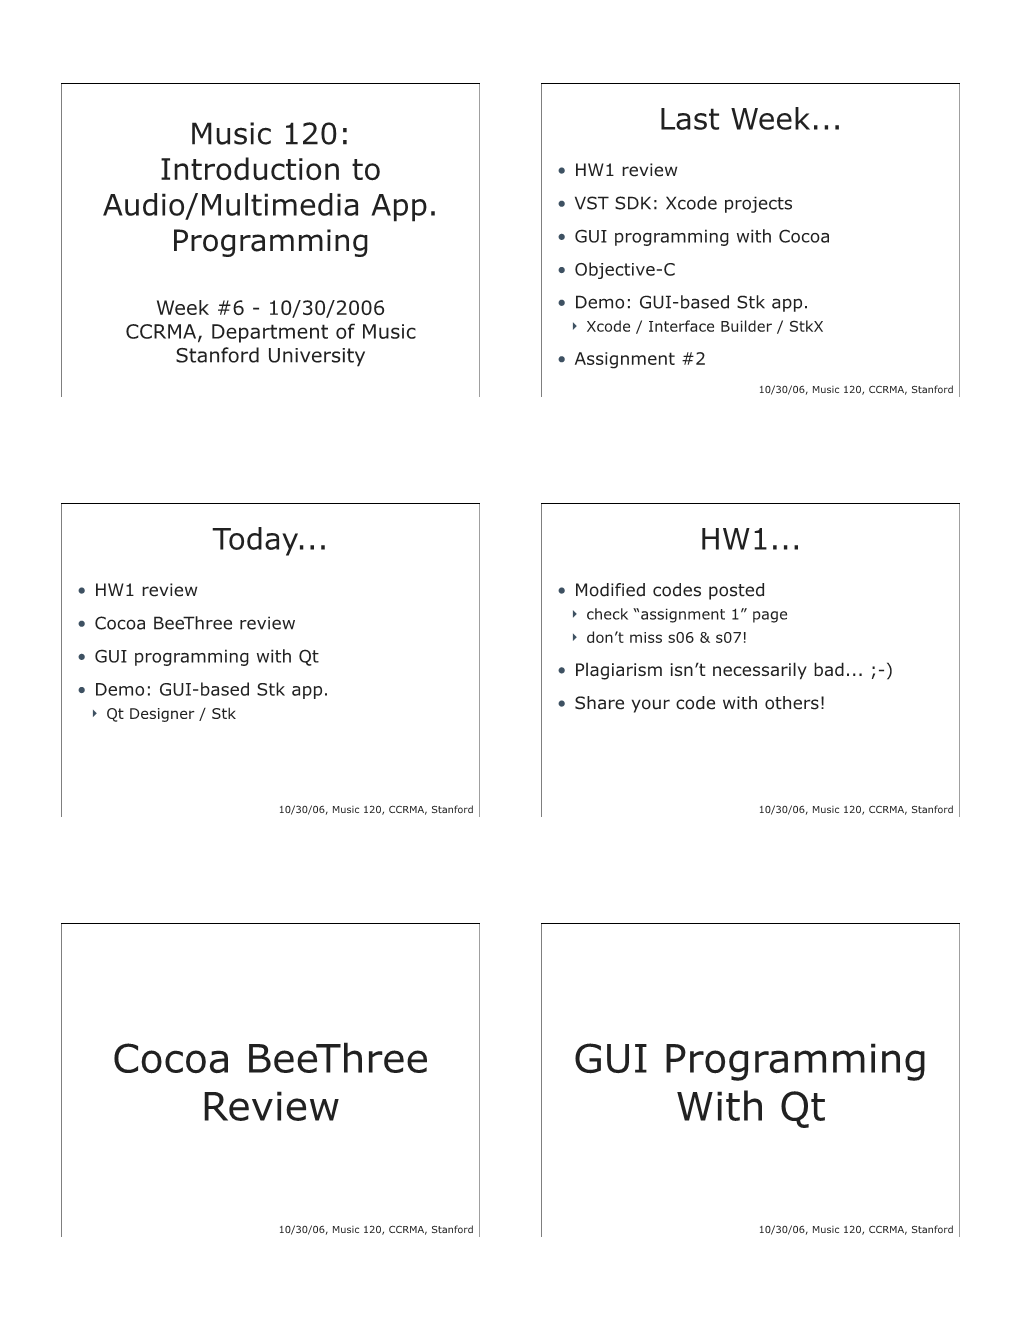 Cocoa Beethree Review GUI Programming with Qt